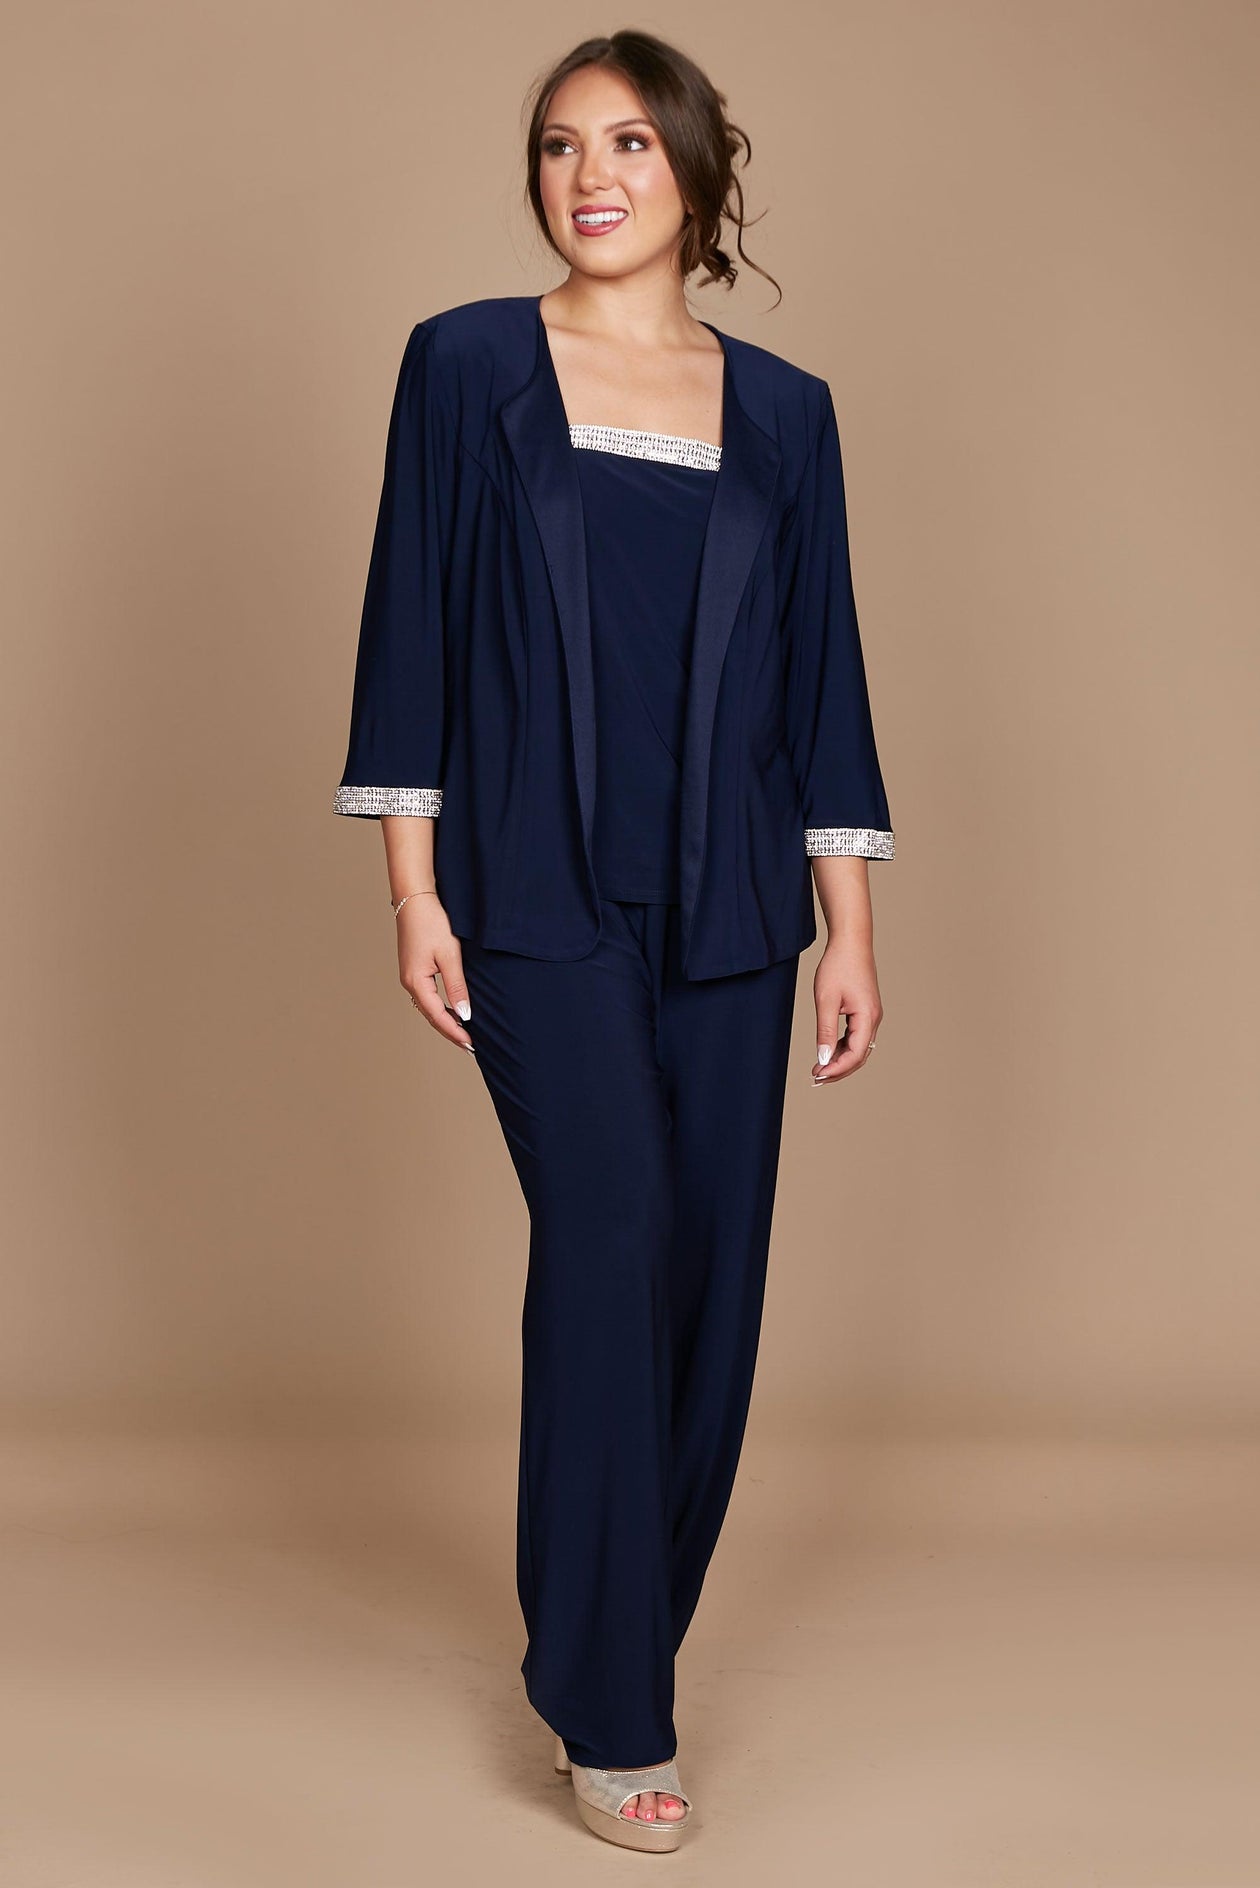 formal 3/4 Sleeve Pantsuit Sale for $29.99 – The Dress Outlet